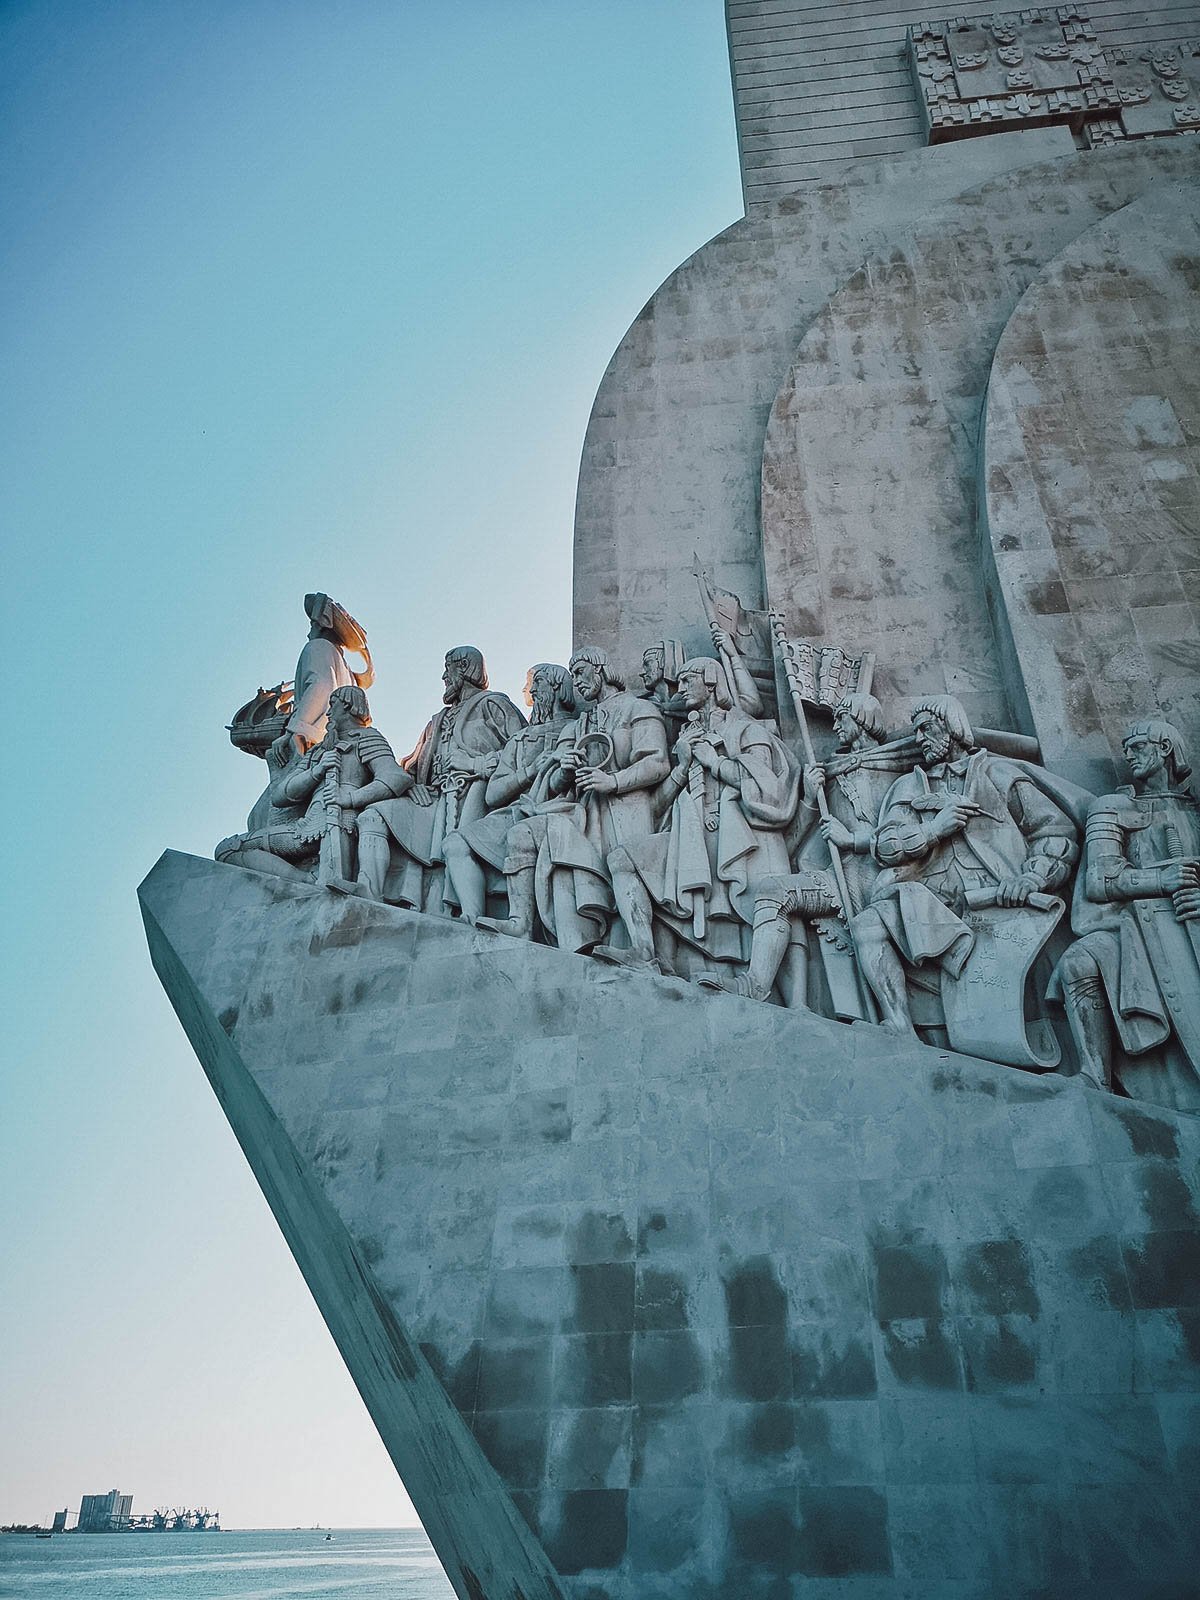 Monument to the Discoveries in Lisbon, Portugal